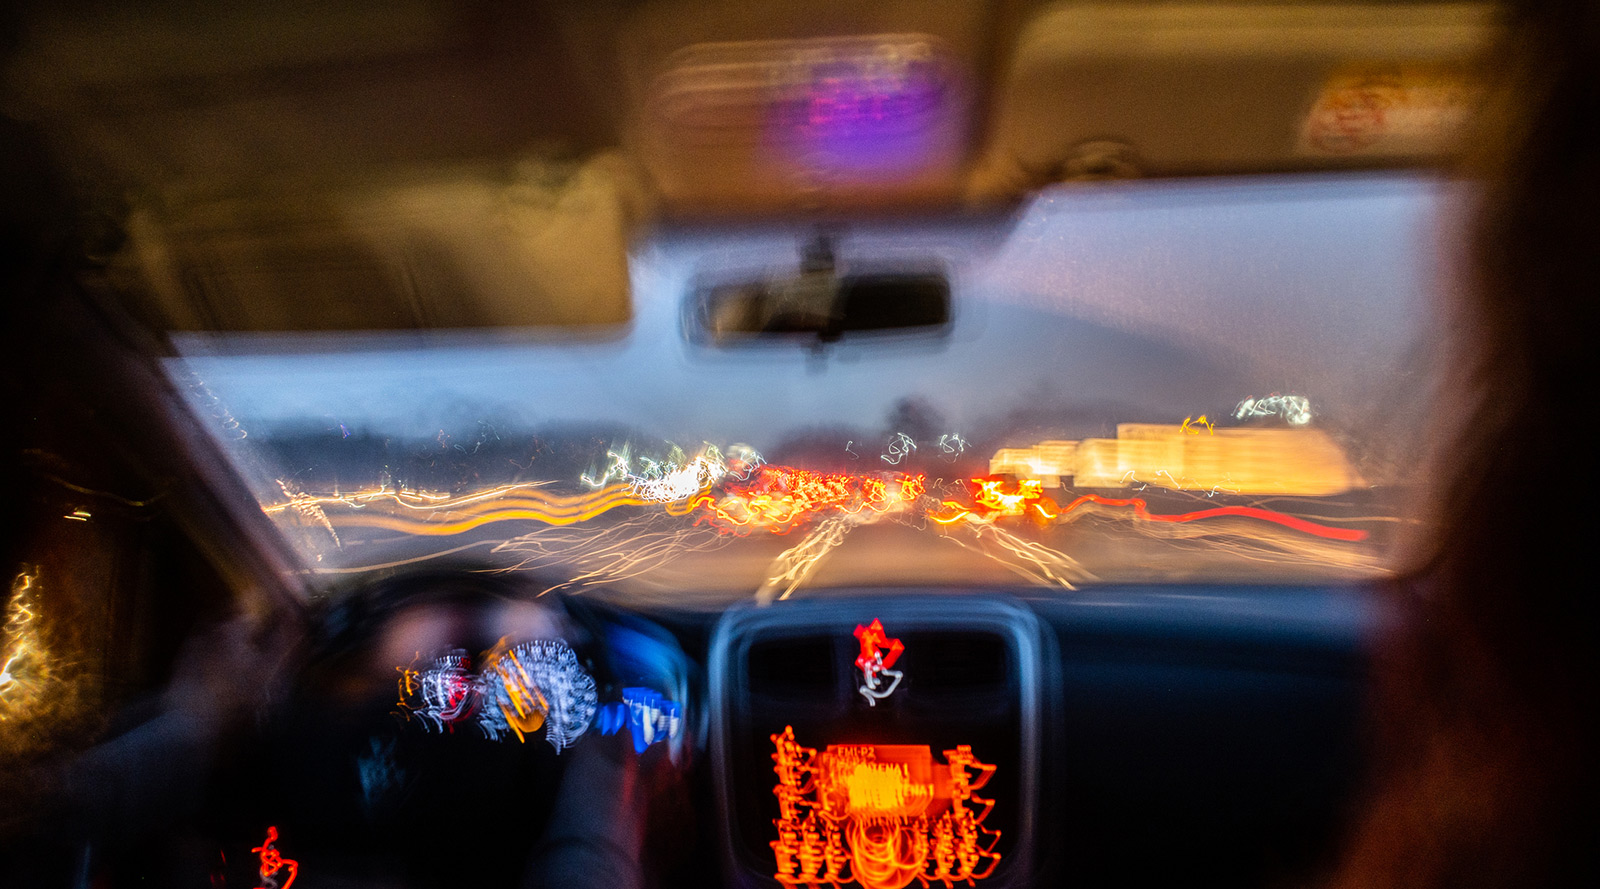 Blurred-photo-from-inside-a-car-at-night